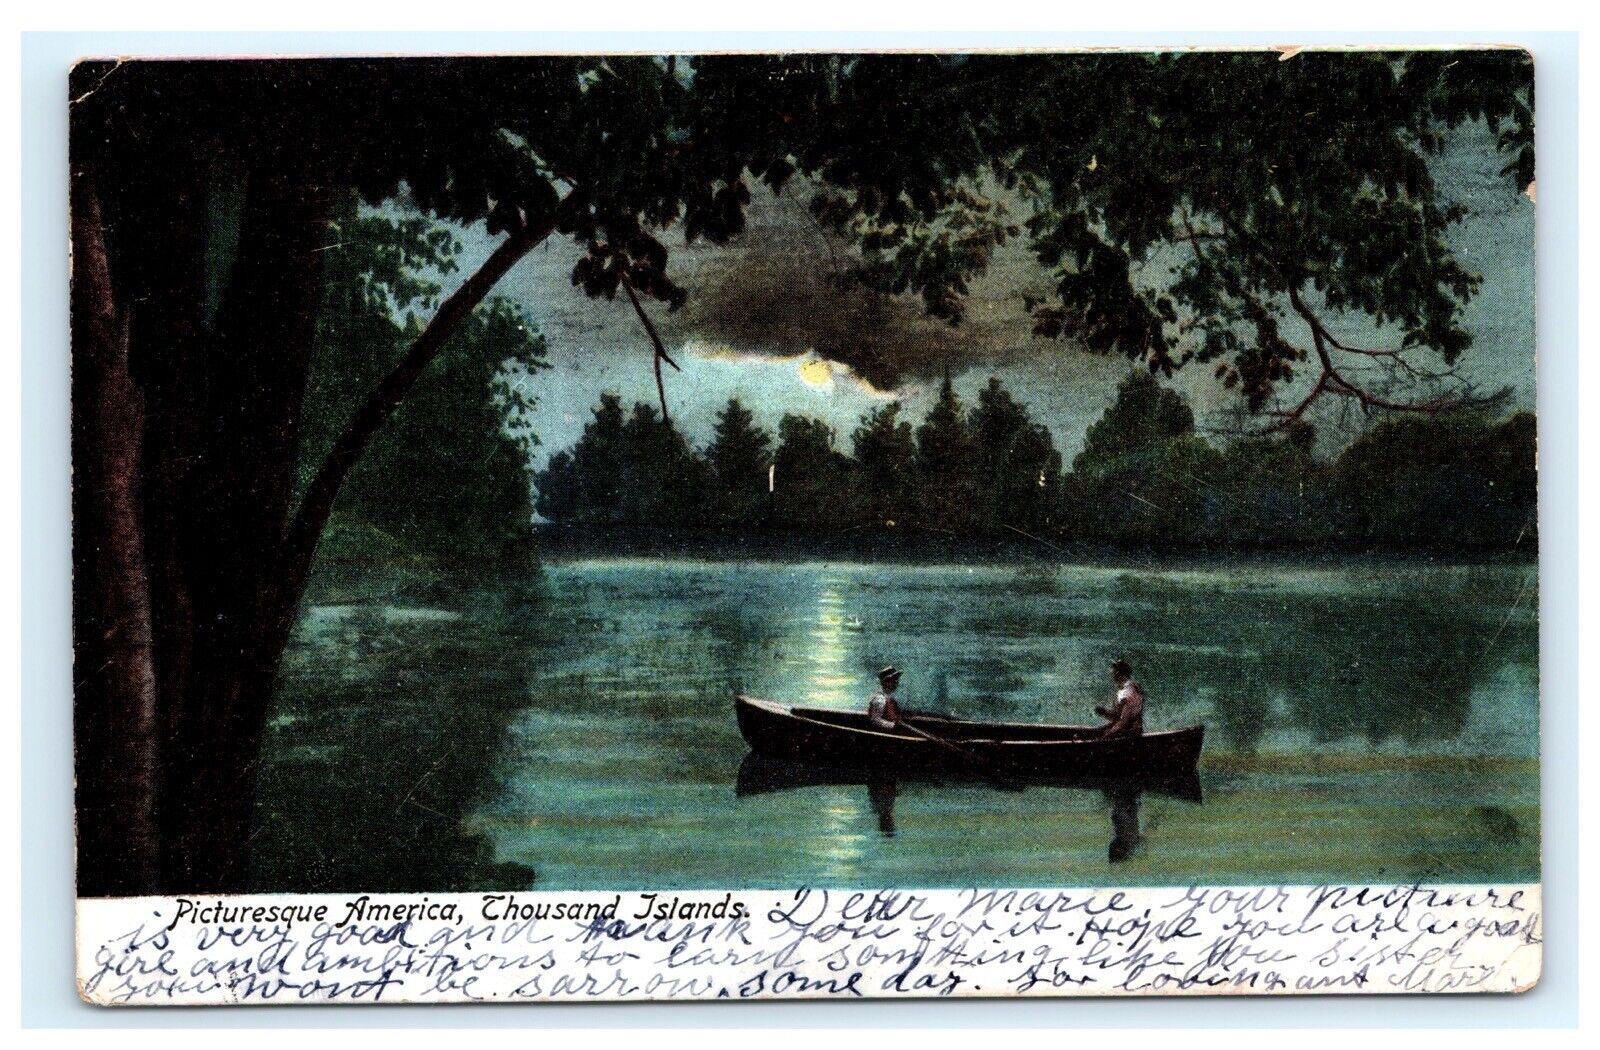 Picturesque America Thousand Islands Boating at Night 1906 UDB Postcard D4